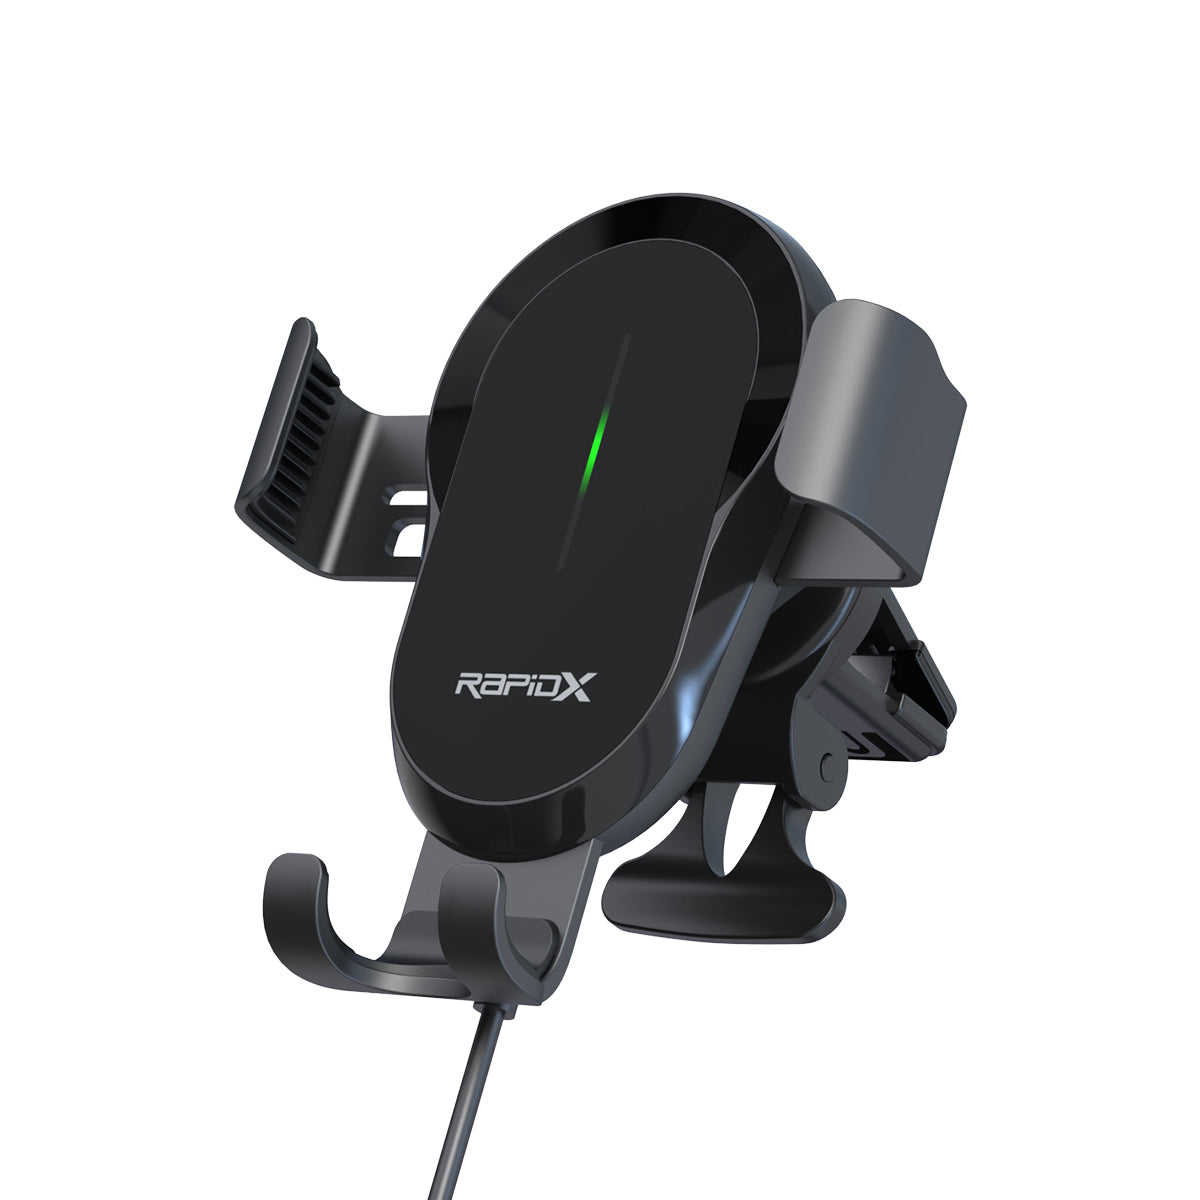 Dashio CW4 Car Vent Mount & Wireless Charger, up to 15W, Slide & Lock Cradle/Clamp, for All Smartphones (iPhone, Samsung, & Other Qi-Enabled Androids)